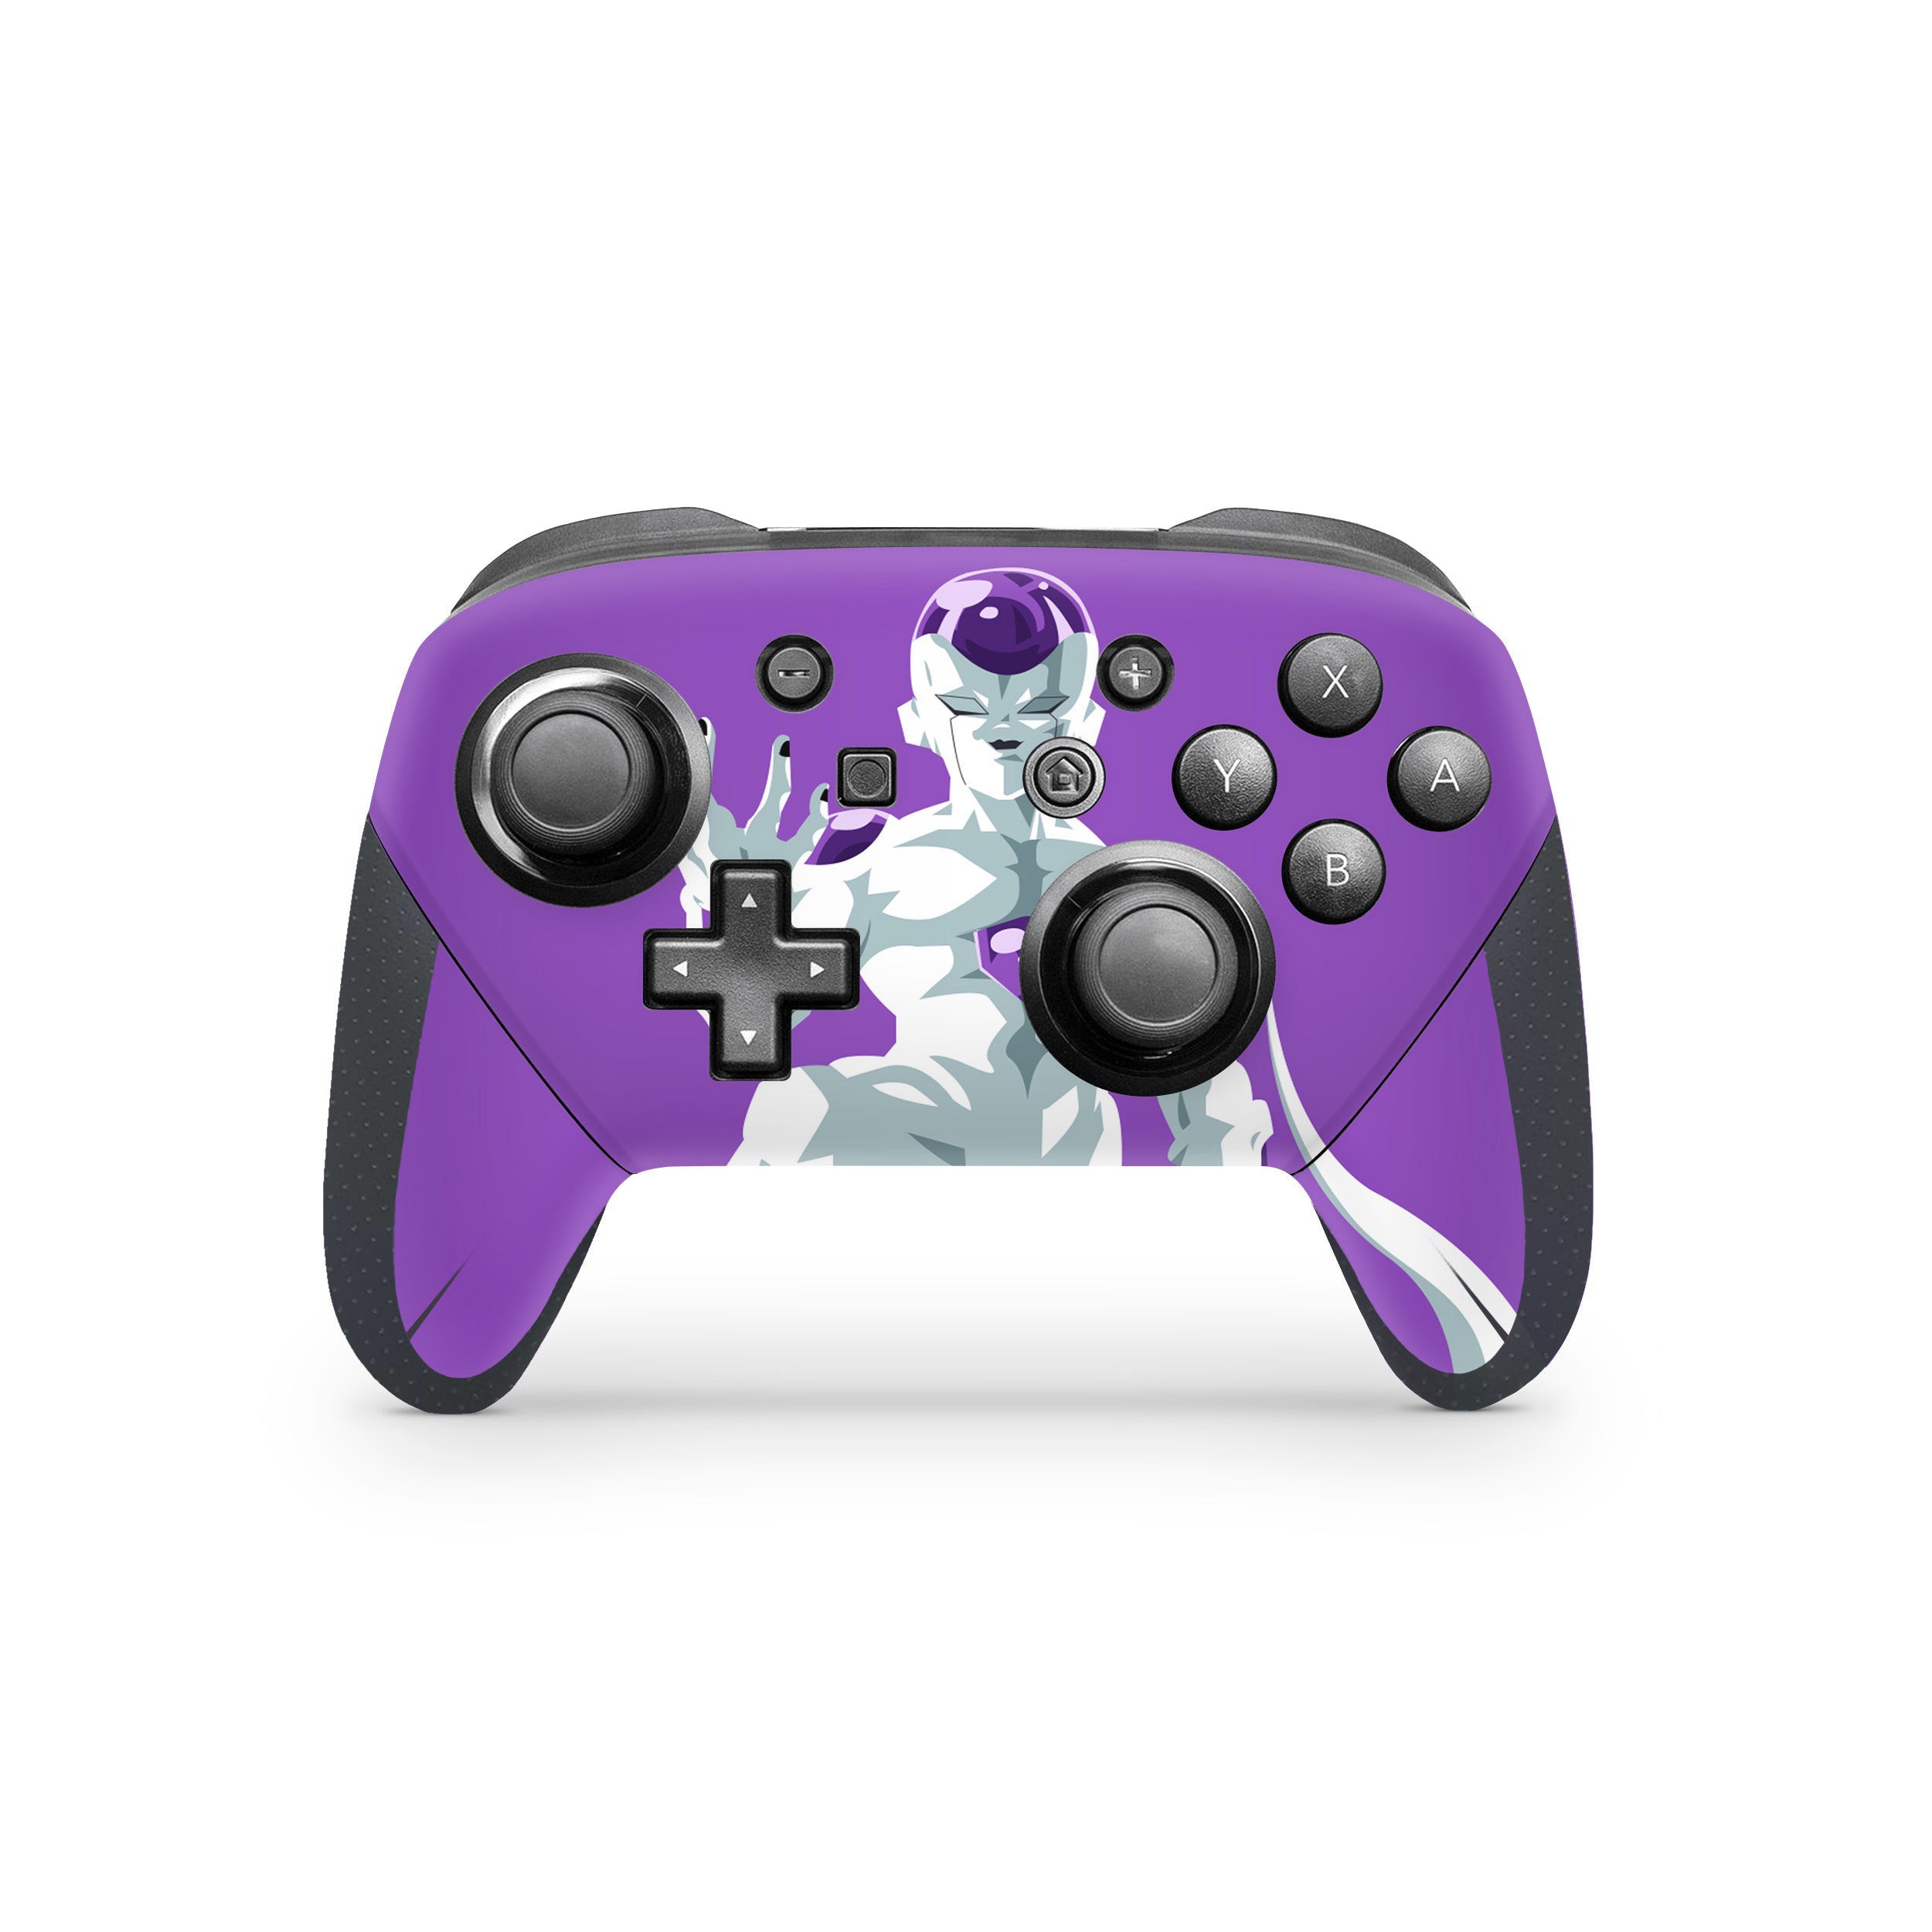 A video game skin featuring a Dragon Ball Z Frieza design for the Switch Pro Controller.